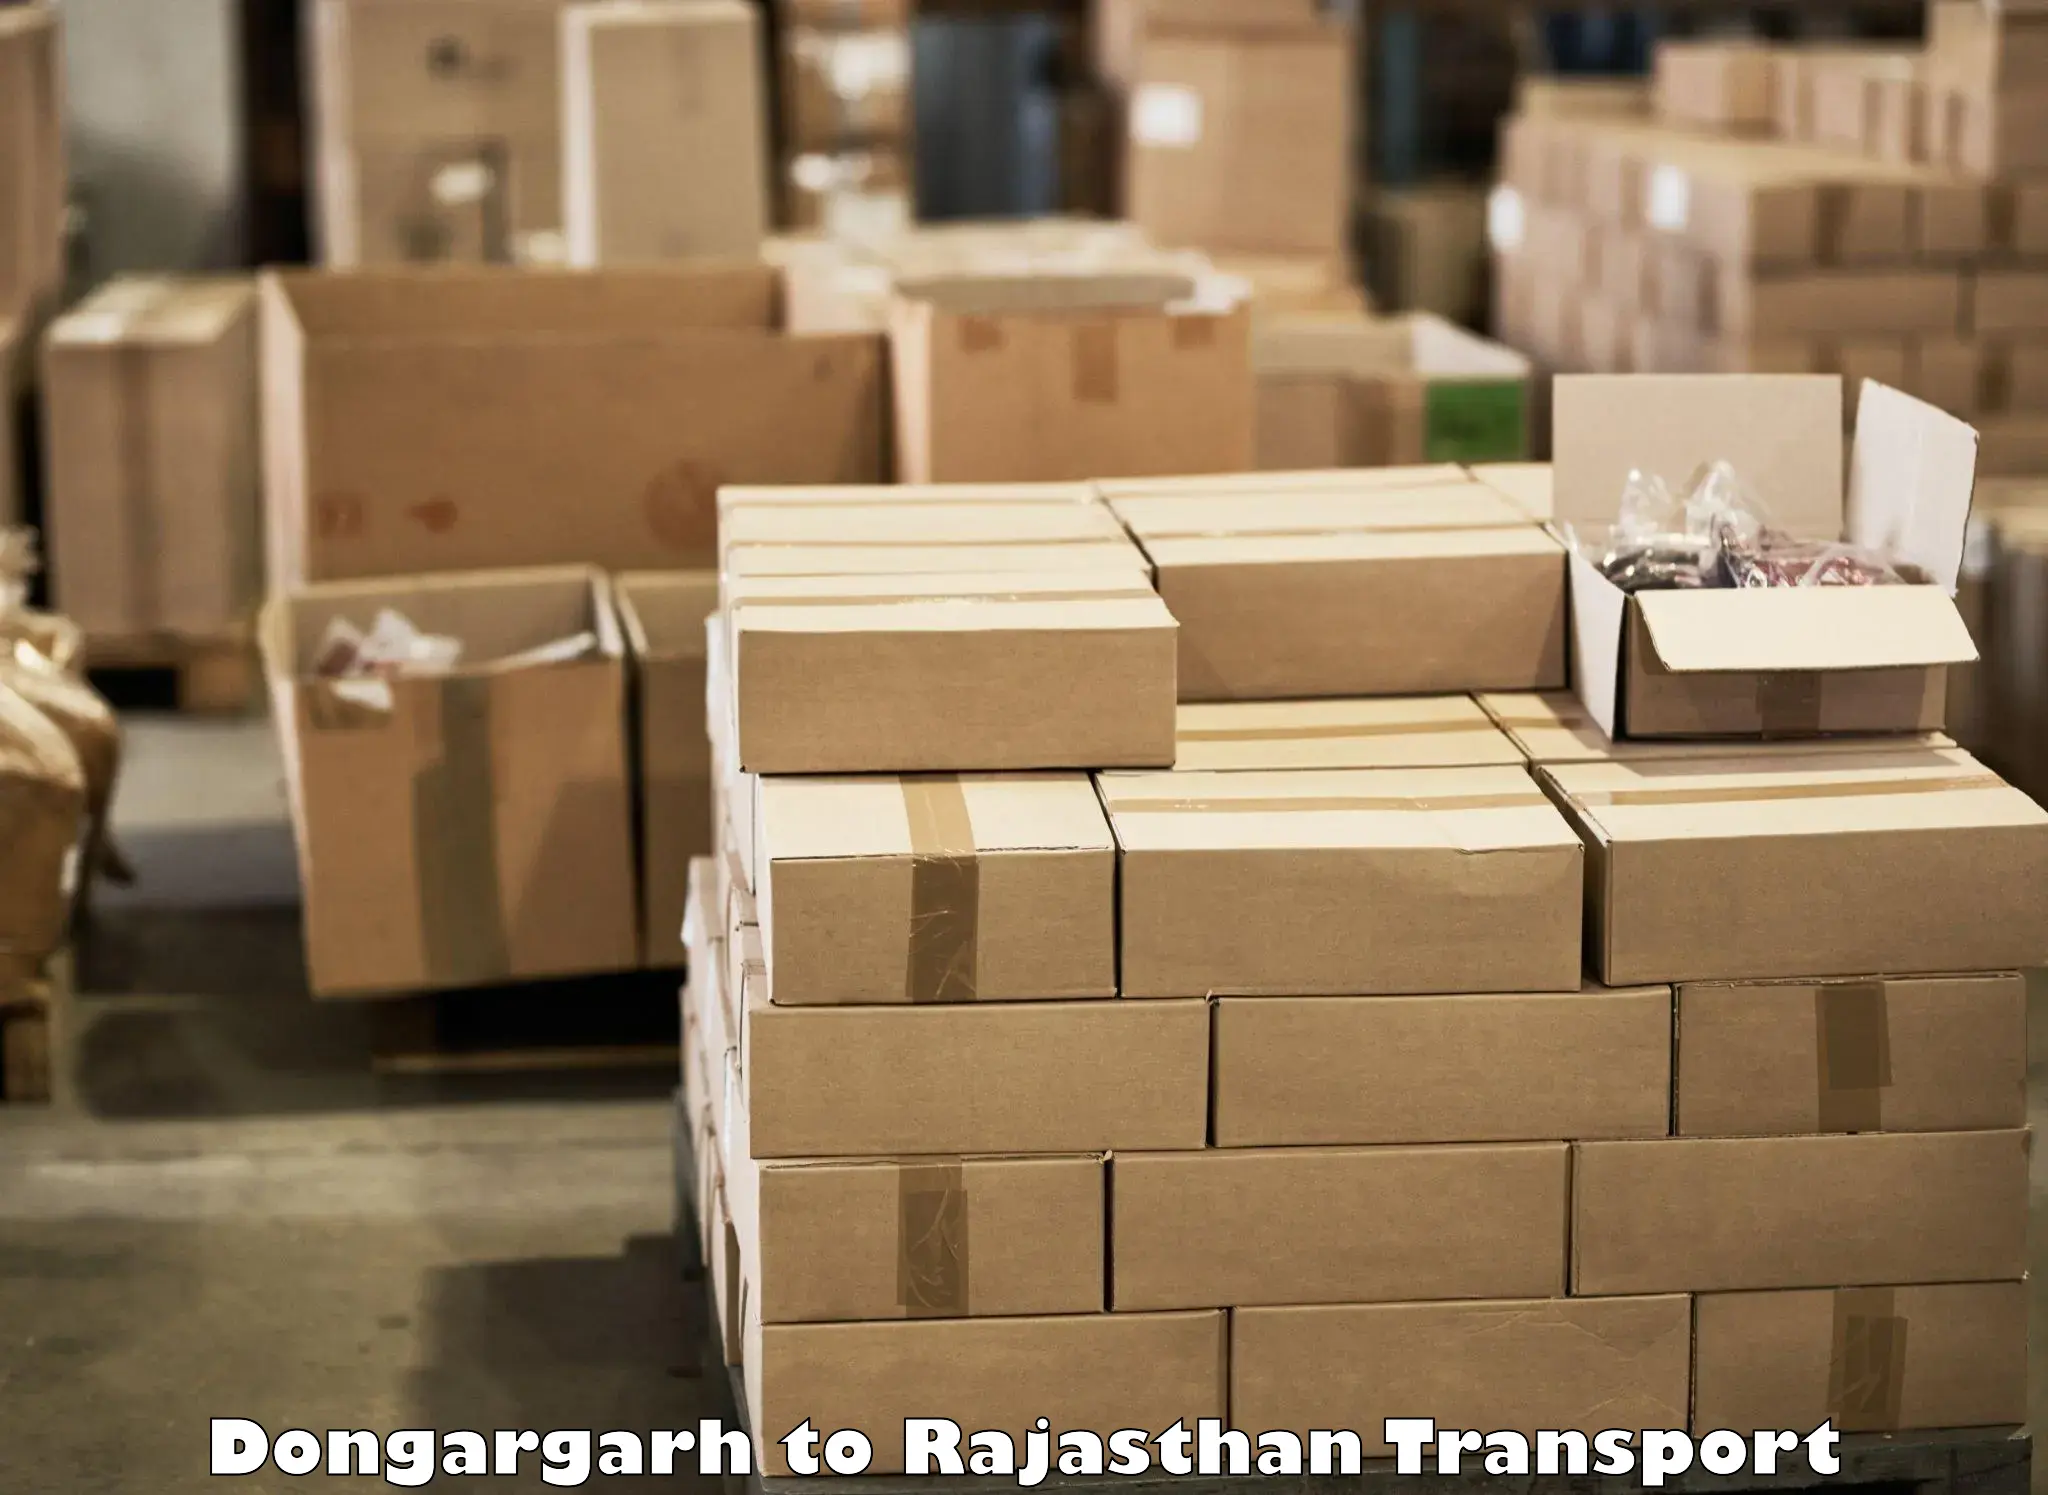 Vehicle parcel service in Dongargarh to Fatehpur Sikar